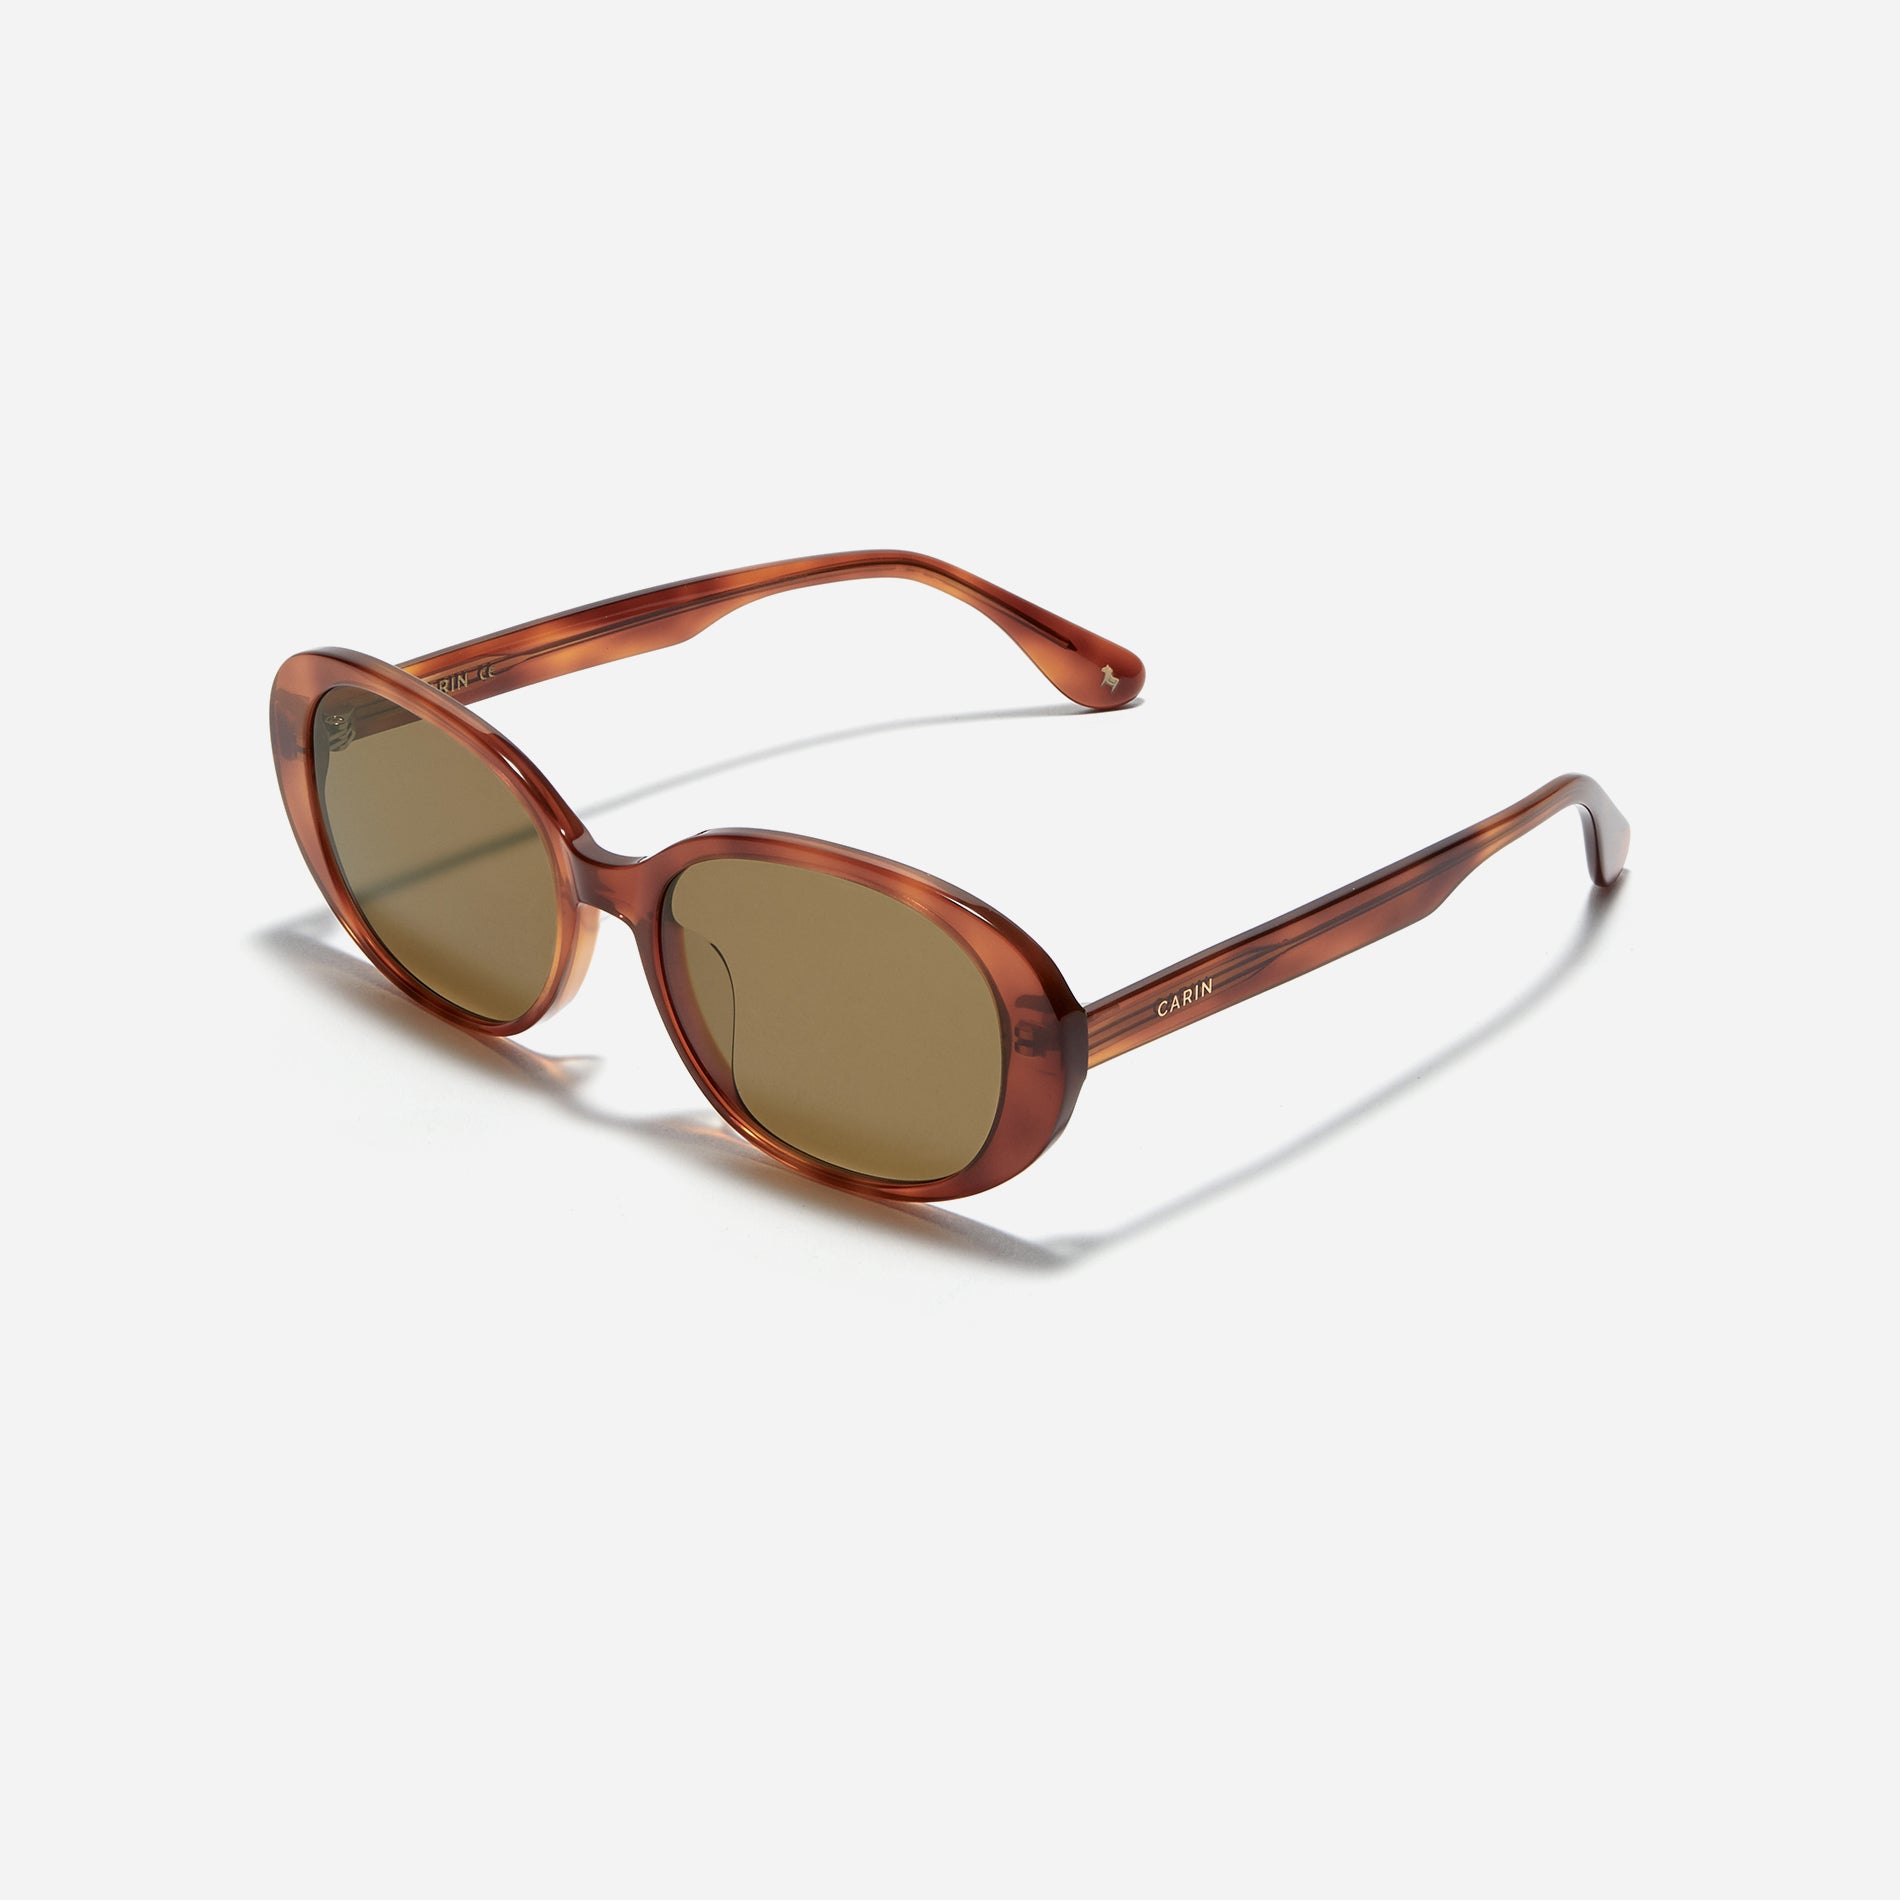 Oval-shaped petite frame sunglasses that feature a modern, unisex, and casual design that reinterprets retro sensibilities with a modern touch.